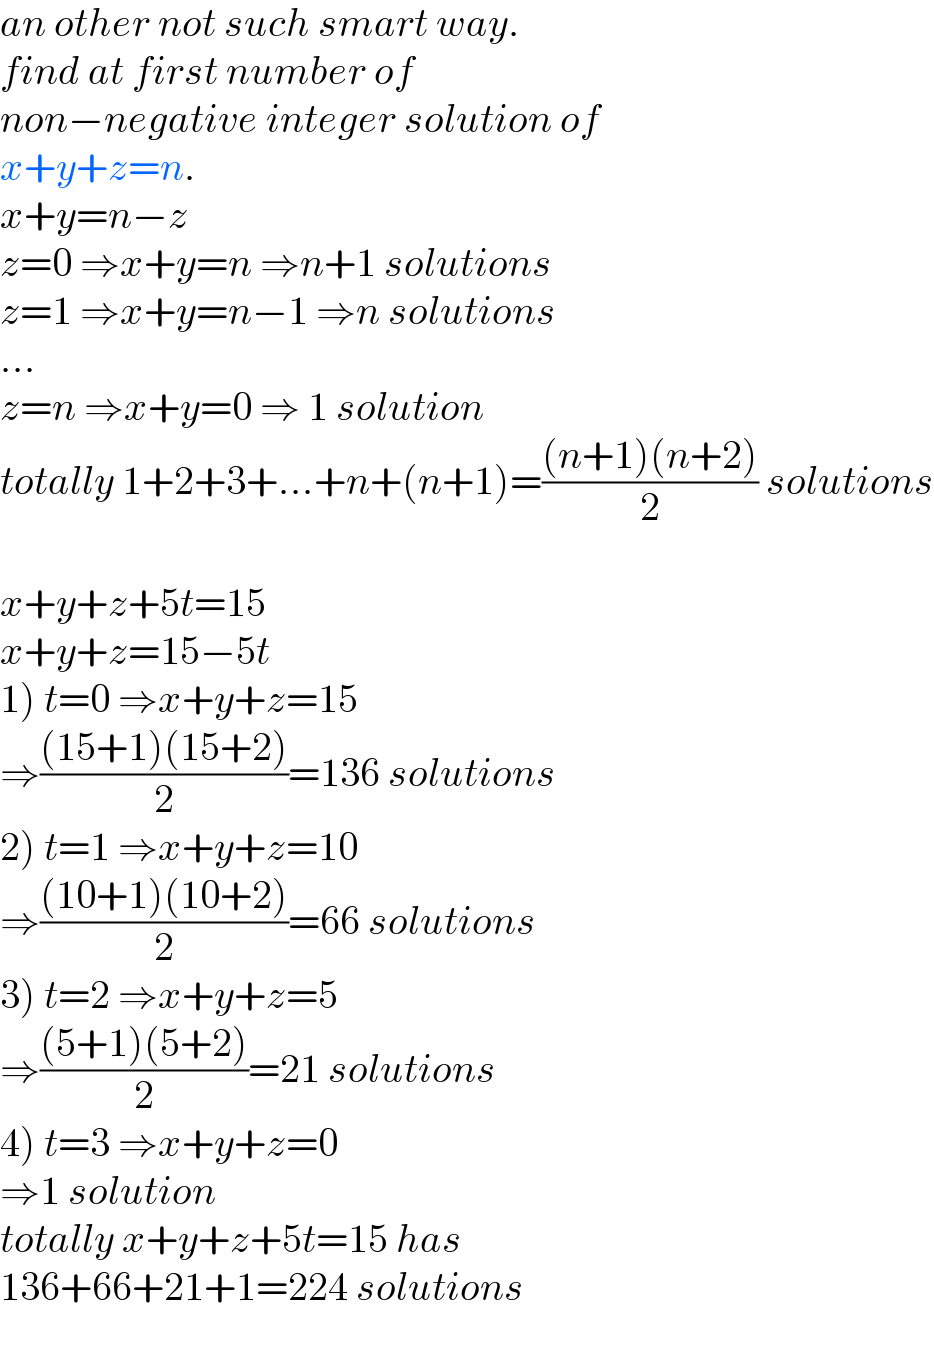 an other not such smart way.  find at first number of   non−negative integer solution of   x+y+z=n.  x+y=n−z  z=0 ⇒x+y=n ⇒n+1 solutions  z=1 ⇒x+y=n−1 ⇒n solutions  ...  z=n ⇒x+y=0 ⇒ 1 solution  totally 1+2+3+...+n+(n+1)=(((n+1)(n+2))/2) solutions    x+y+z+5t=15  x+y+z=15−5t  1) t=0 ⇒x+y+z=15  ⇒(((15+1)(15+2))/2)=136 solutions  2) t=1 ⇒x+y+z=10  ⇒(((10+1)(10+2))/2)=66 solutions  3) t=2 ⇒x+y+z=5  ⇒(((5+1)(5+2))/2)=21 solutions  4) t=3 ⇒x+y+z=0  ⇒1 solution  totally x+y+z+5t=15 has  136+66+21+1=224 solutions  